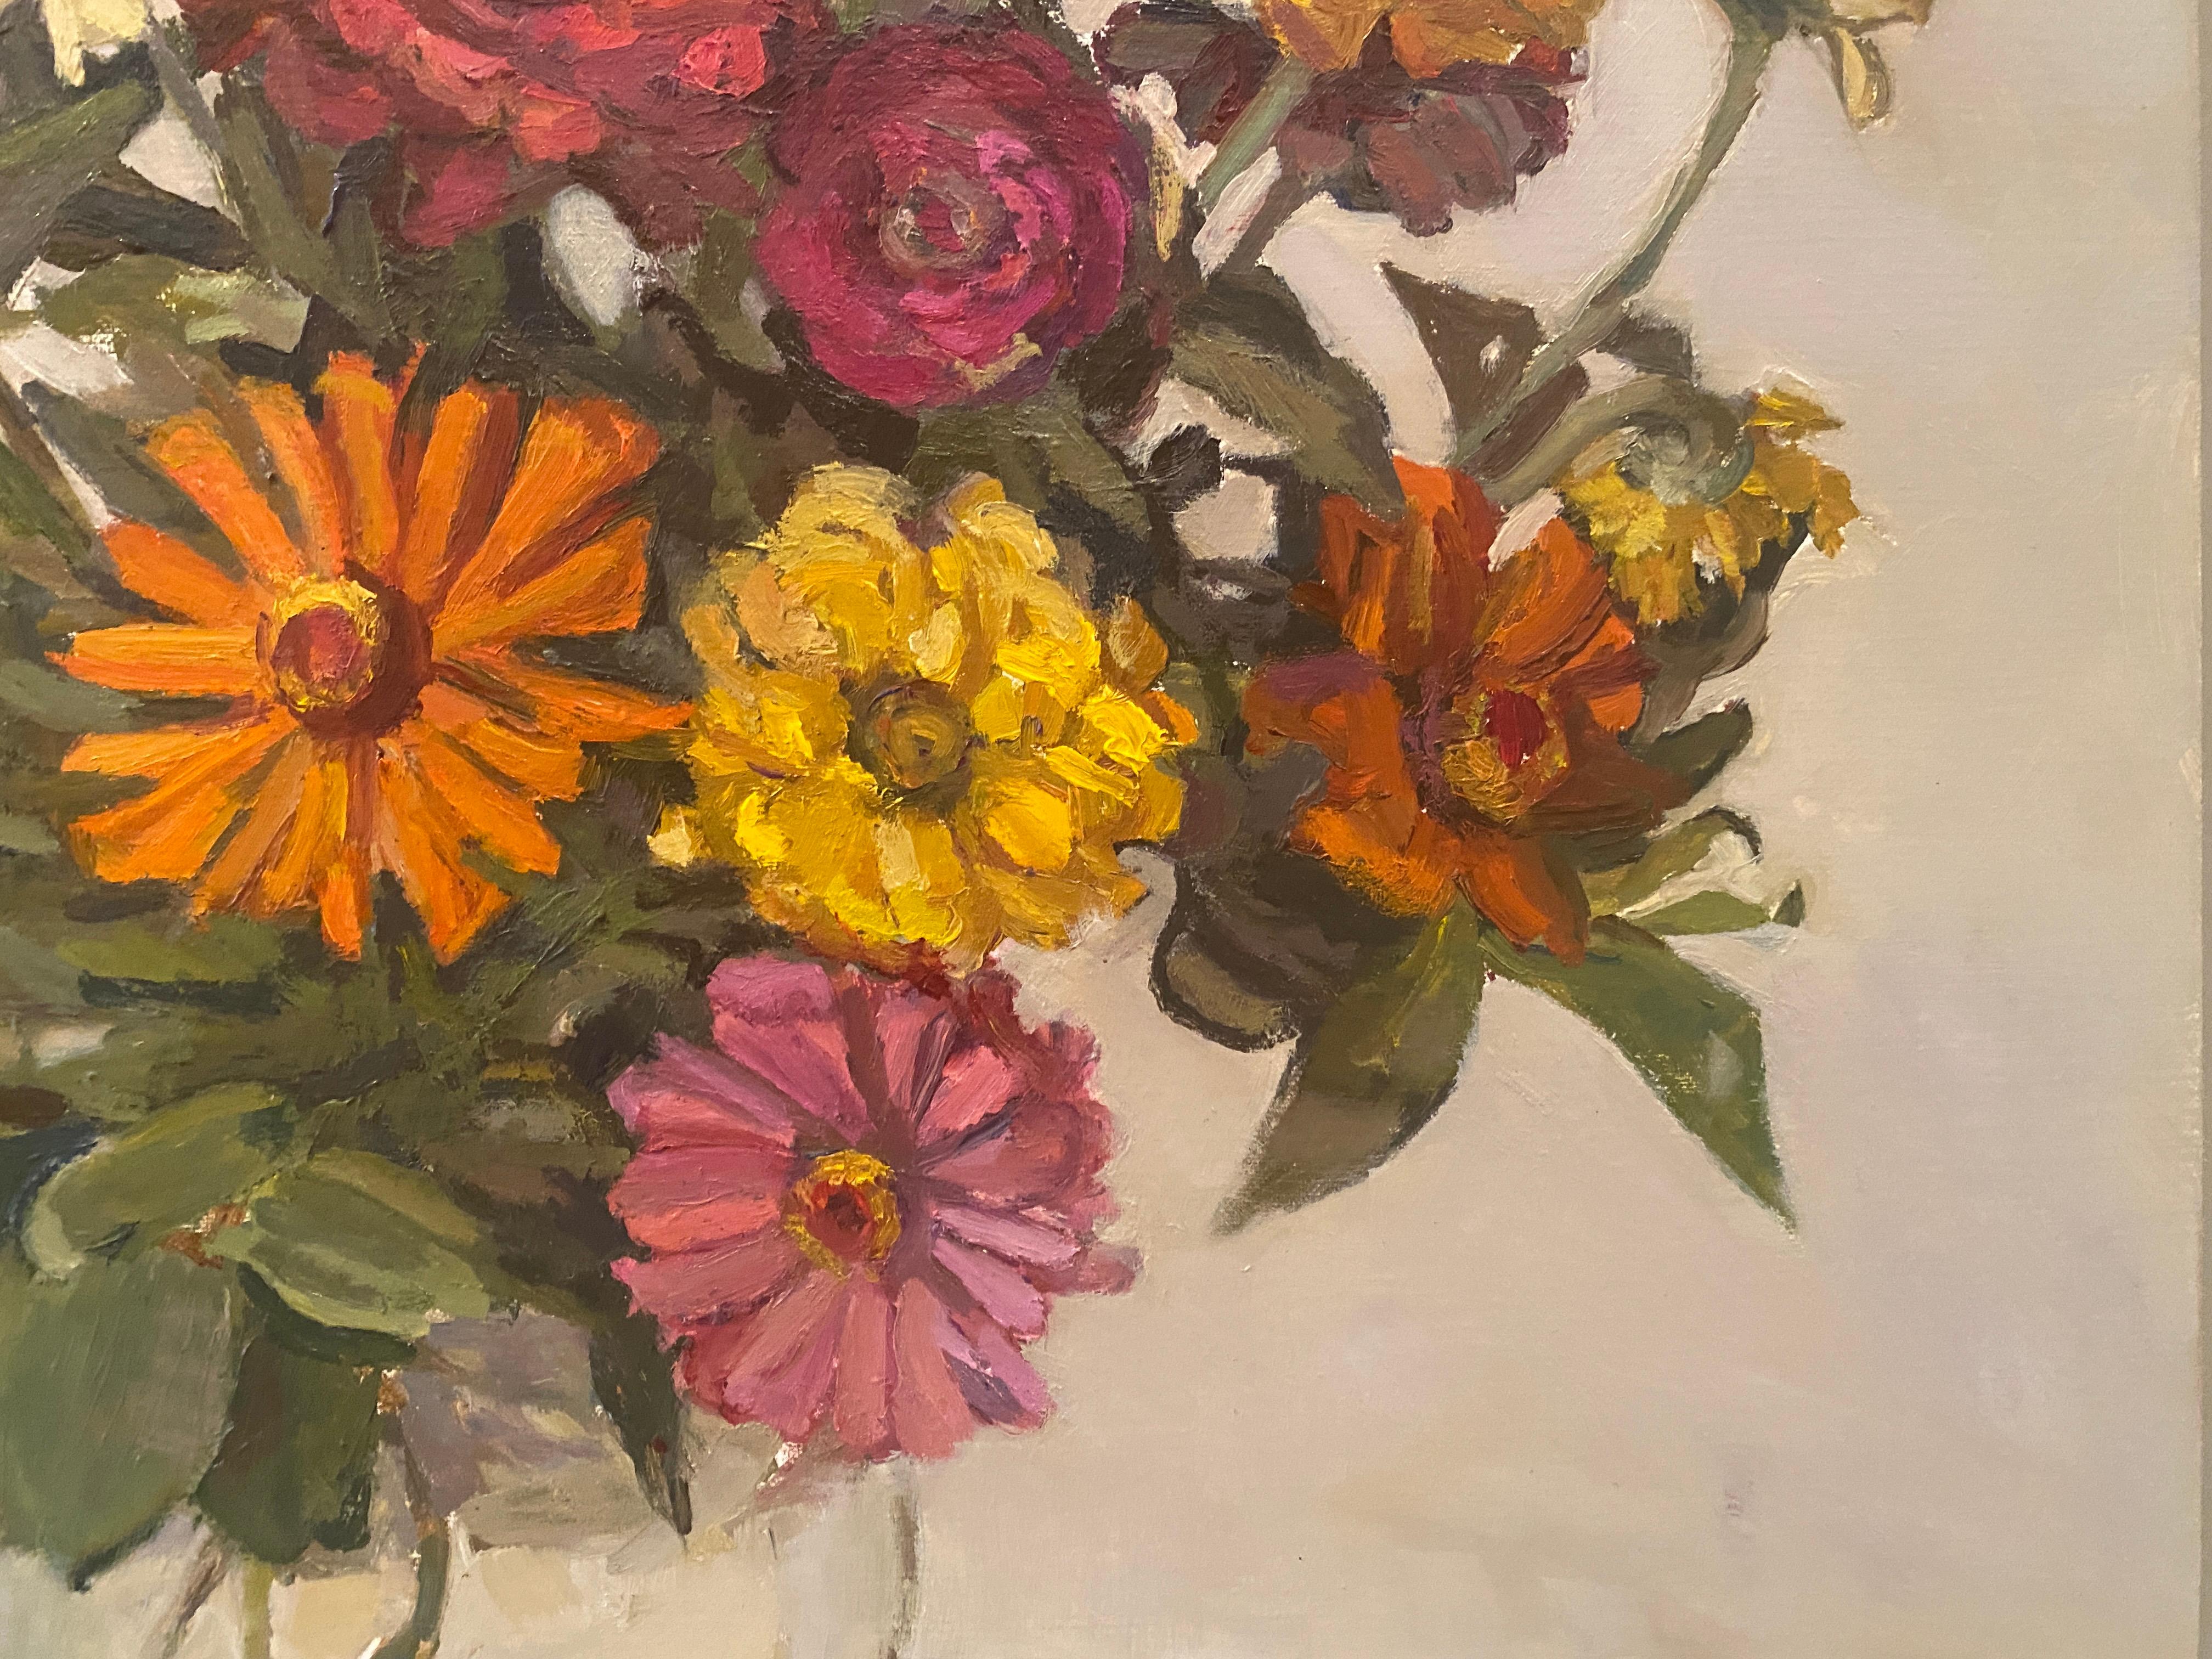 An oil painting of flowers, zinnias,  arranged in a round vase against an off-white backdrop. Framed in a white floating frame. 

Painting dimensions: 22 x 20.5 inches
Framed dimensions: 24.5 x 23 x 2.25 inches




Artist Bio
Maryann Lucas lives and